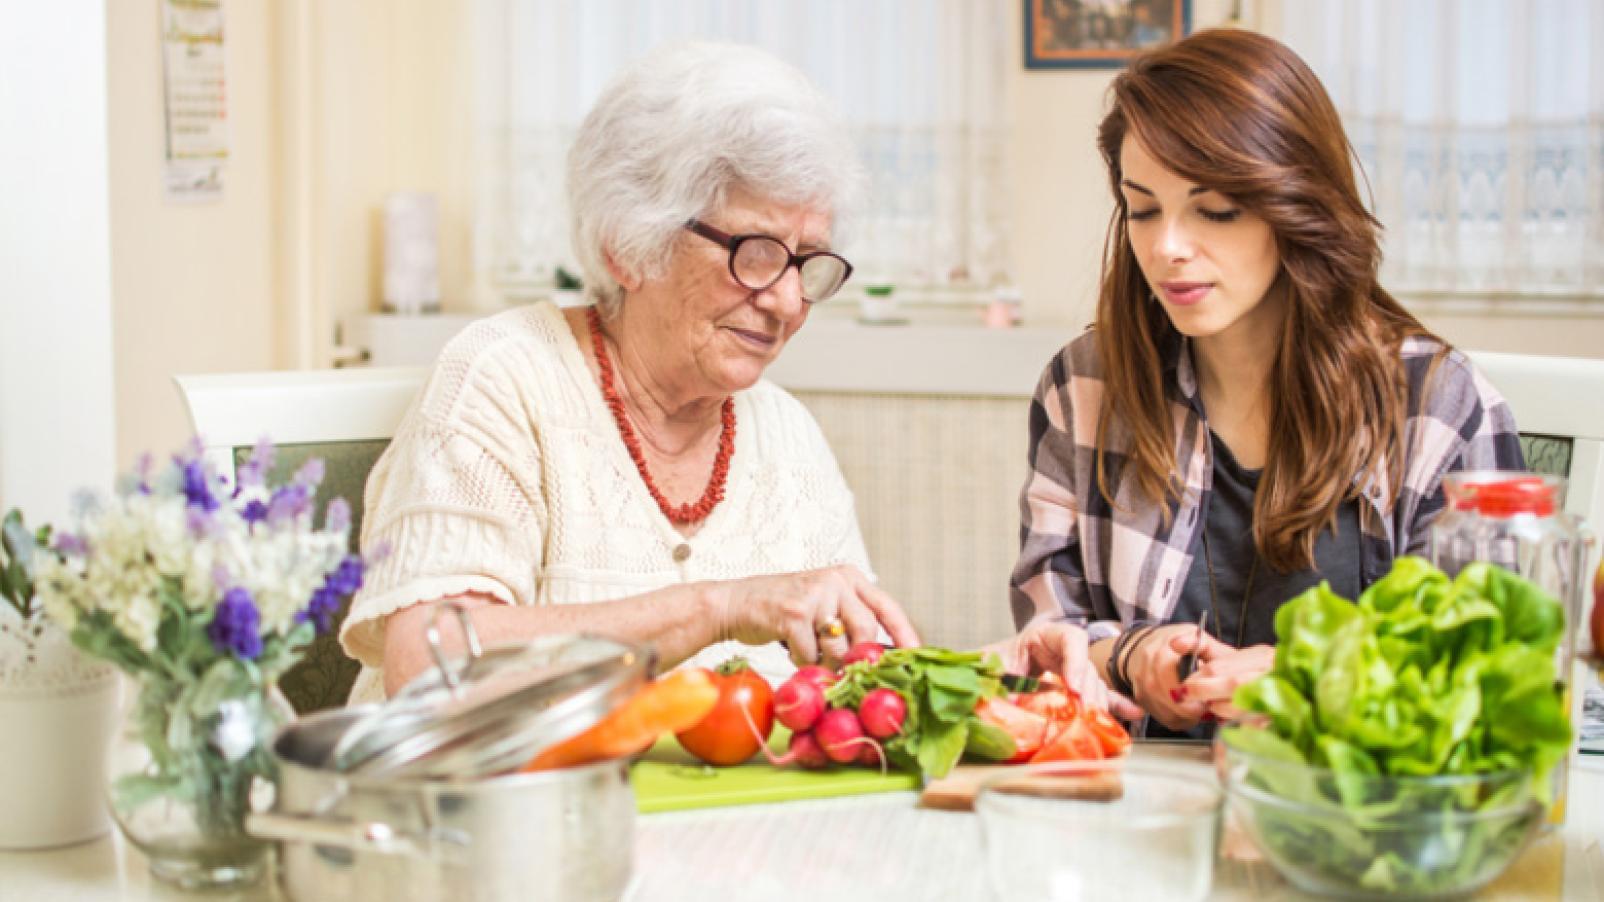 An elderly woman and a younger lady in a kitchen with vegetables